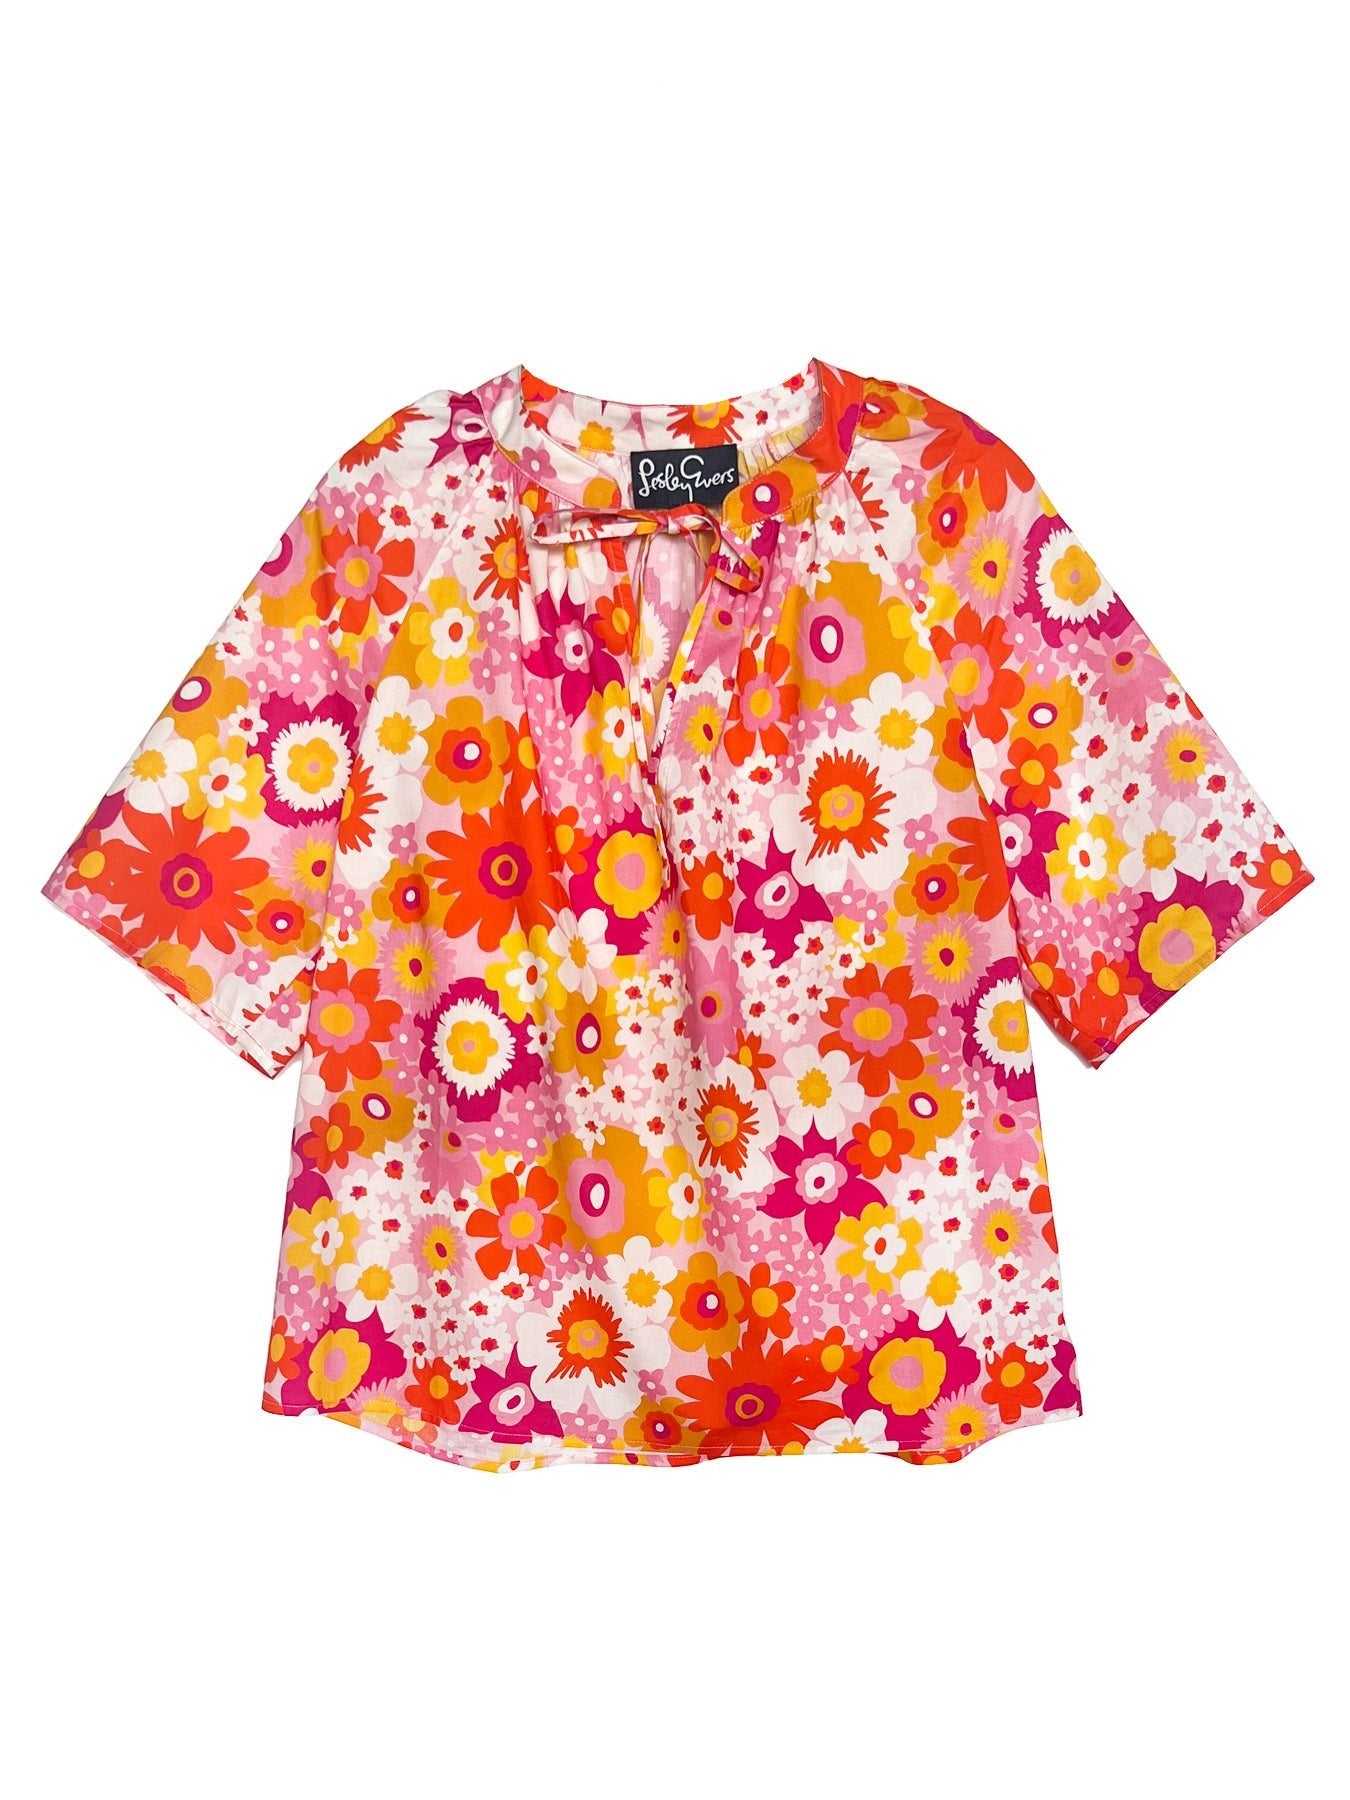 WILLOW blouse Flower Power Pink - Lesley Evers-Pink-pink blouse-Shop